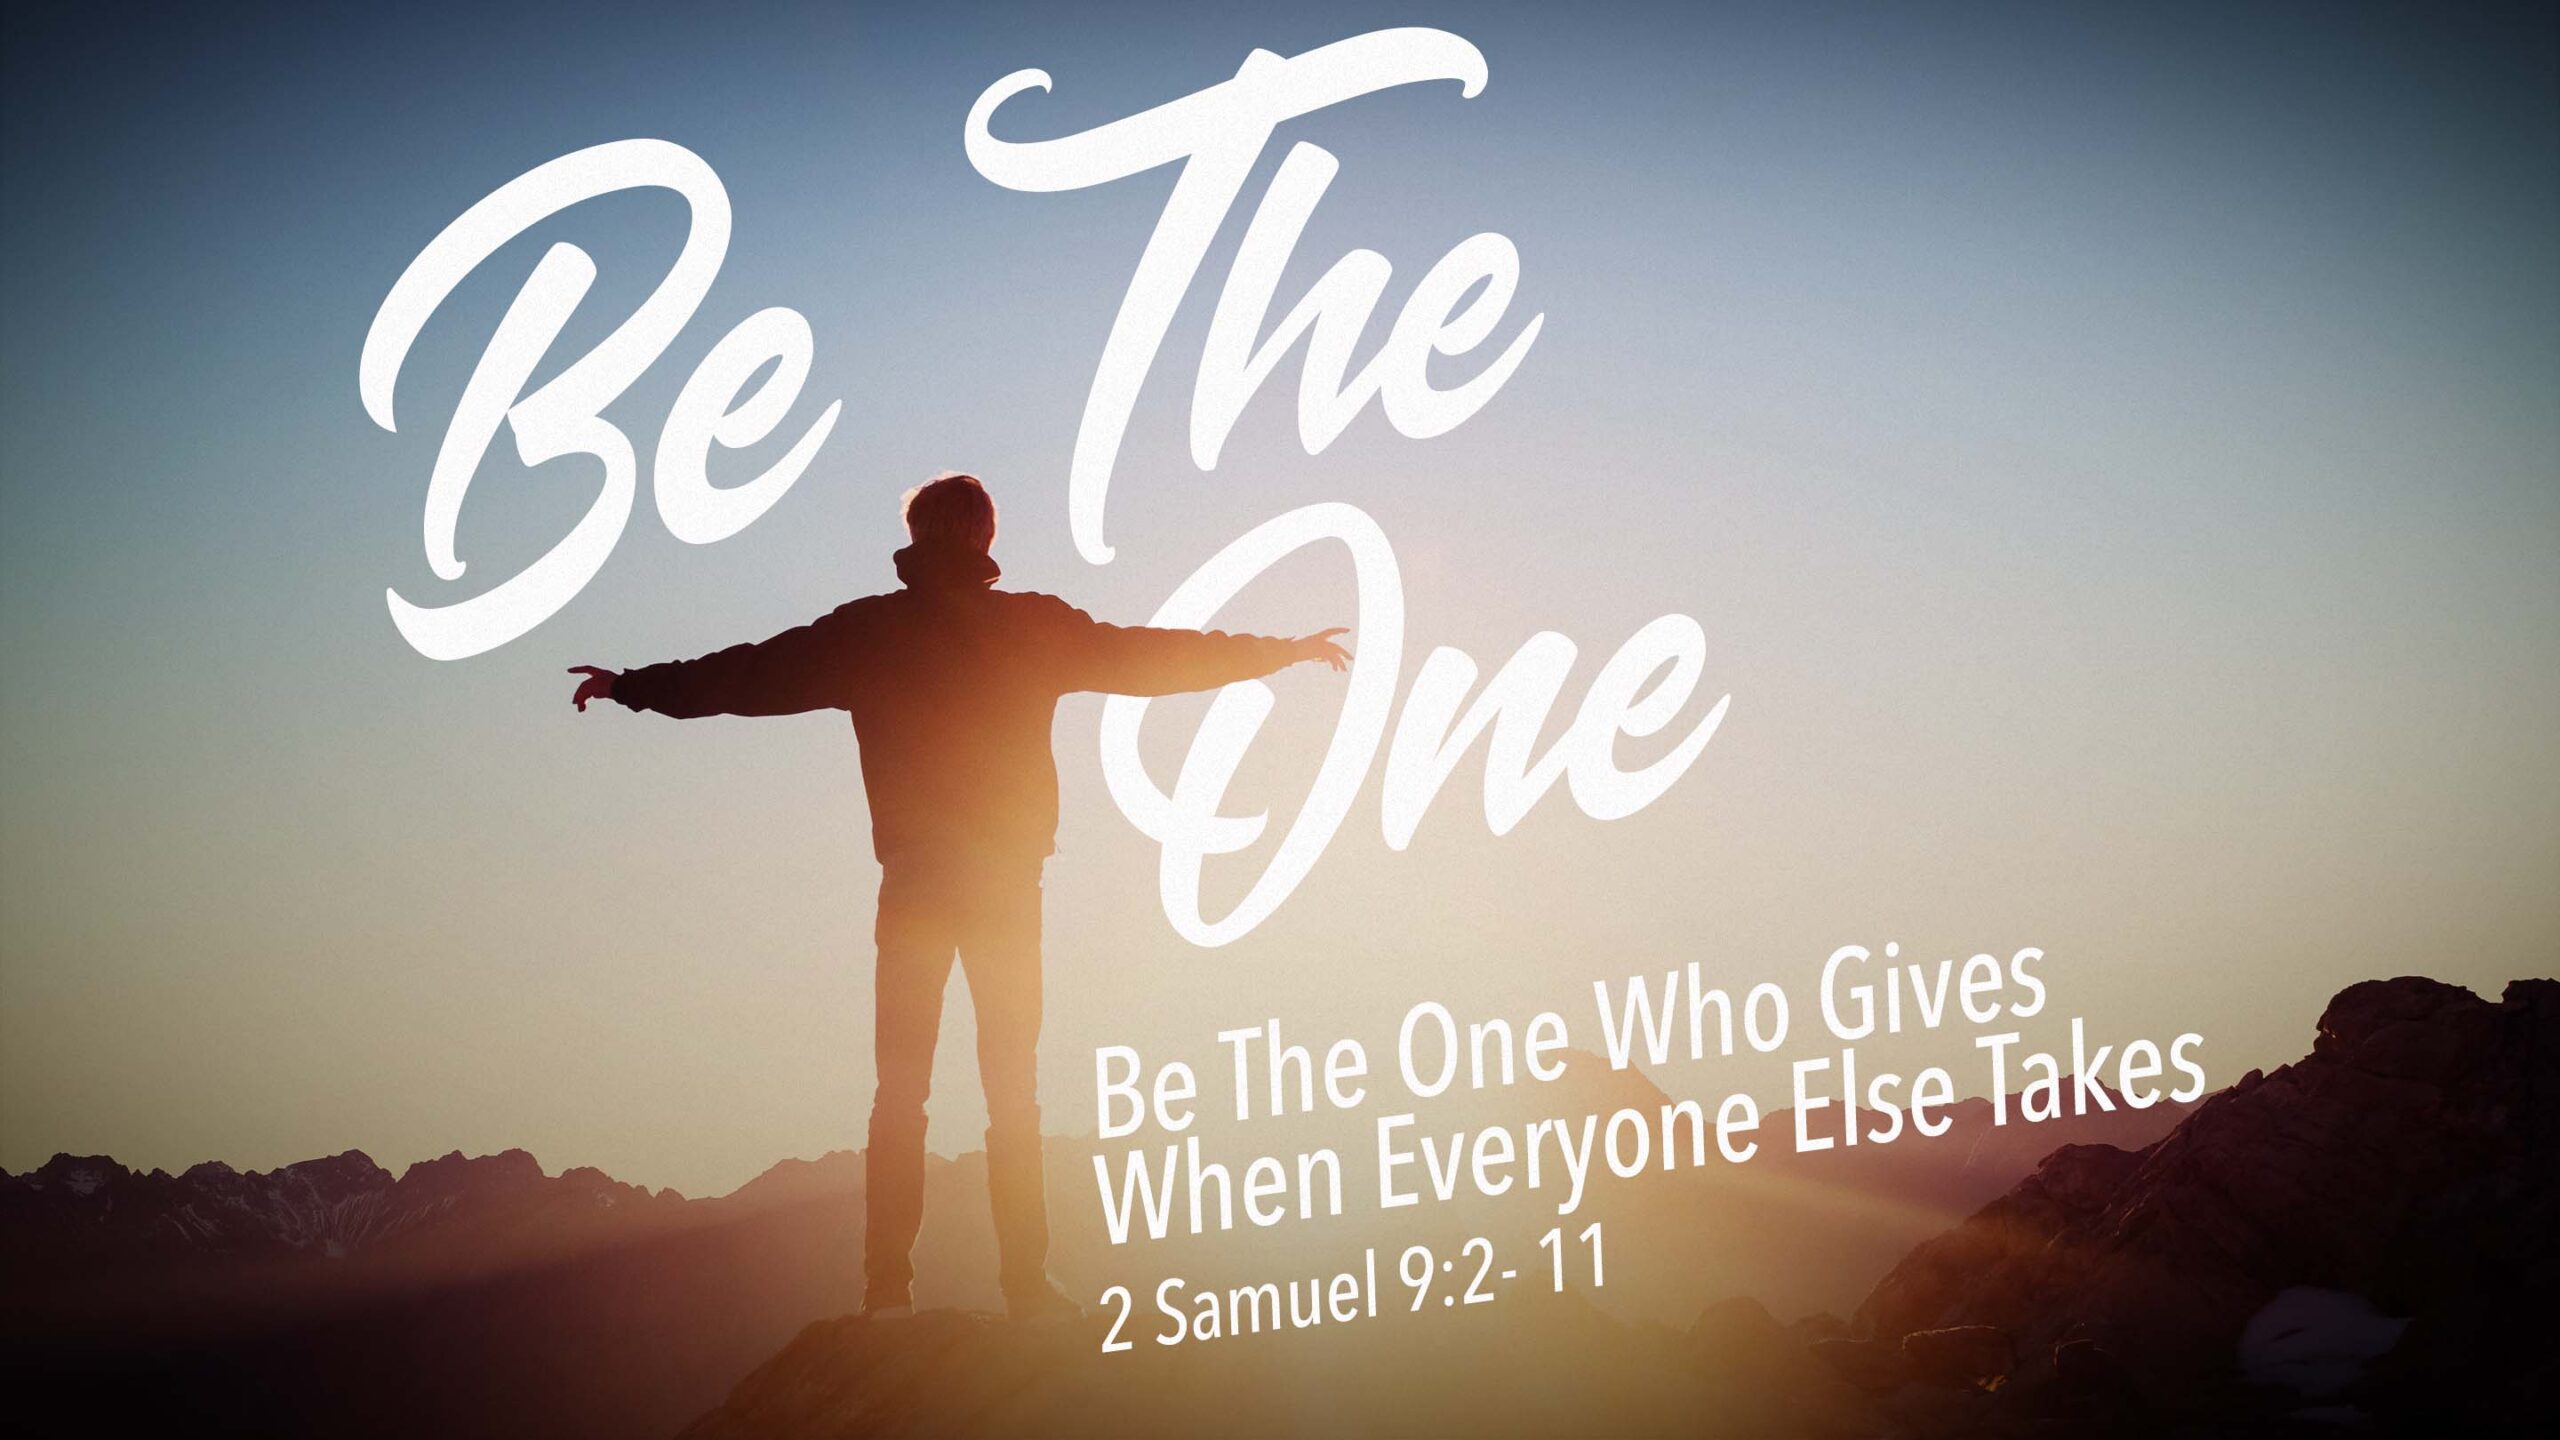 Be The One Part 3 “Be The One Who Gives When Everyone Else Takes” (Traditional)